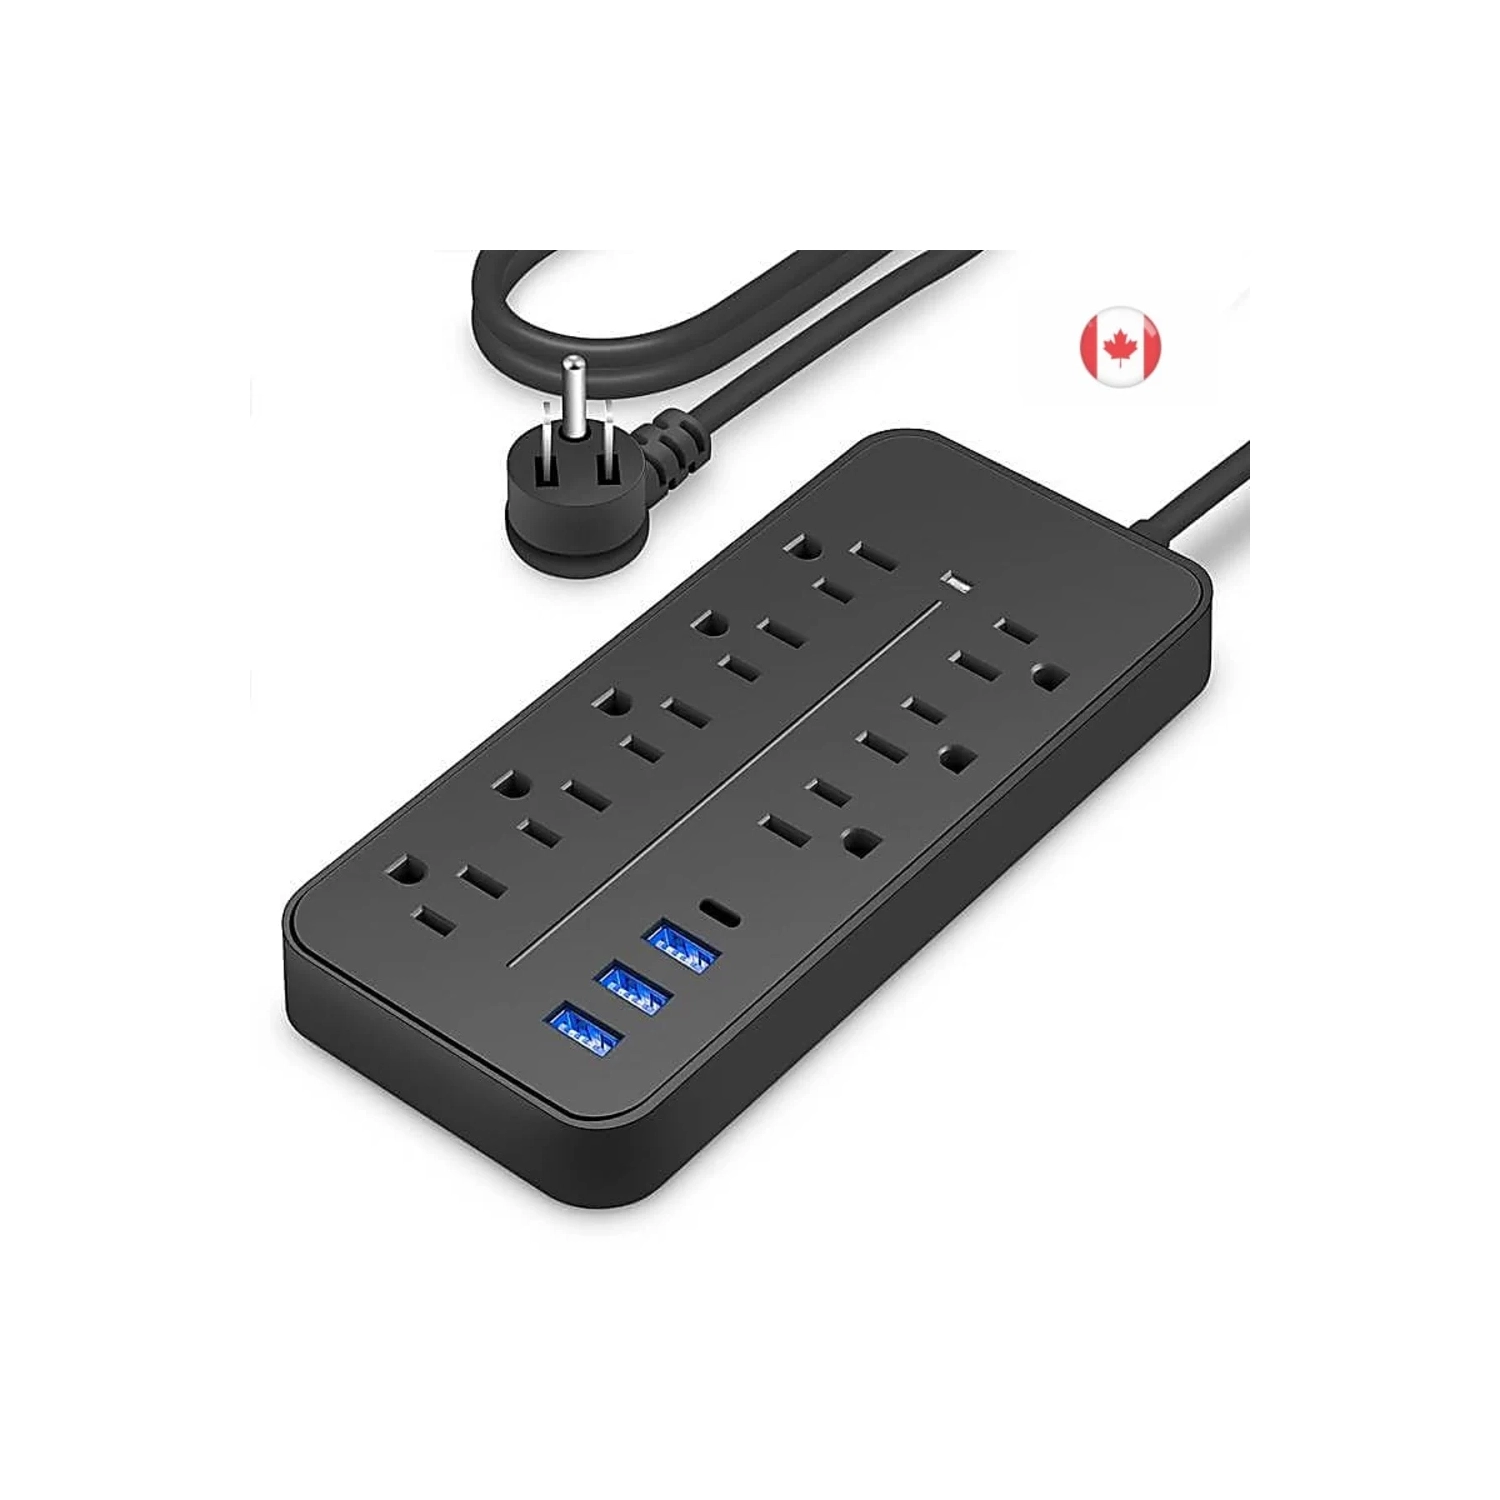 8 AC Outlets power bar 3 USB A & 1 USB C Ports, 4ft Extension Cord - Power Strip & Surge Protector in Sleek Black for Home, Office, Kitchen, Garage & Dorms